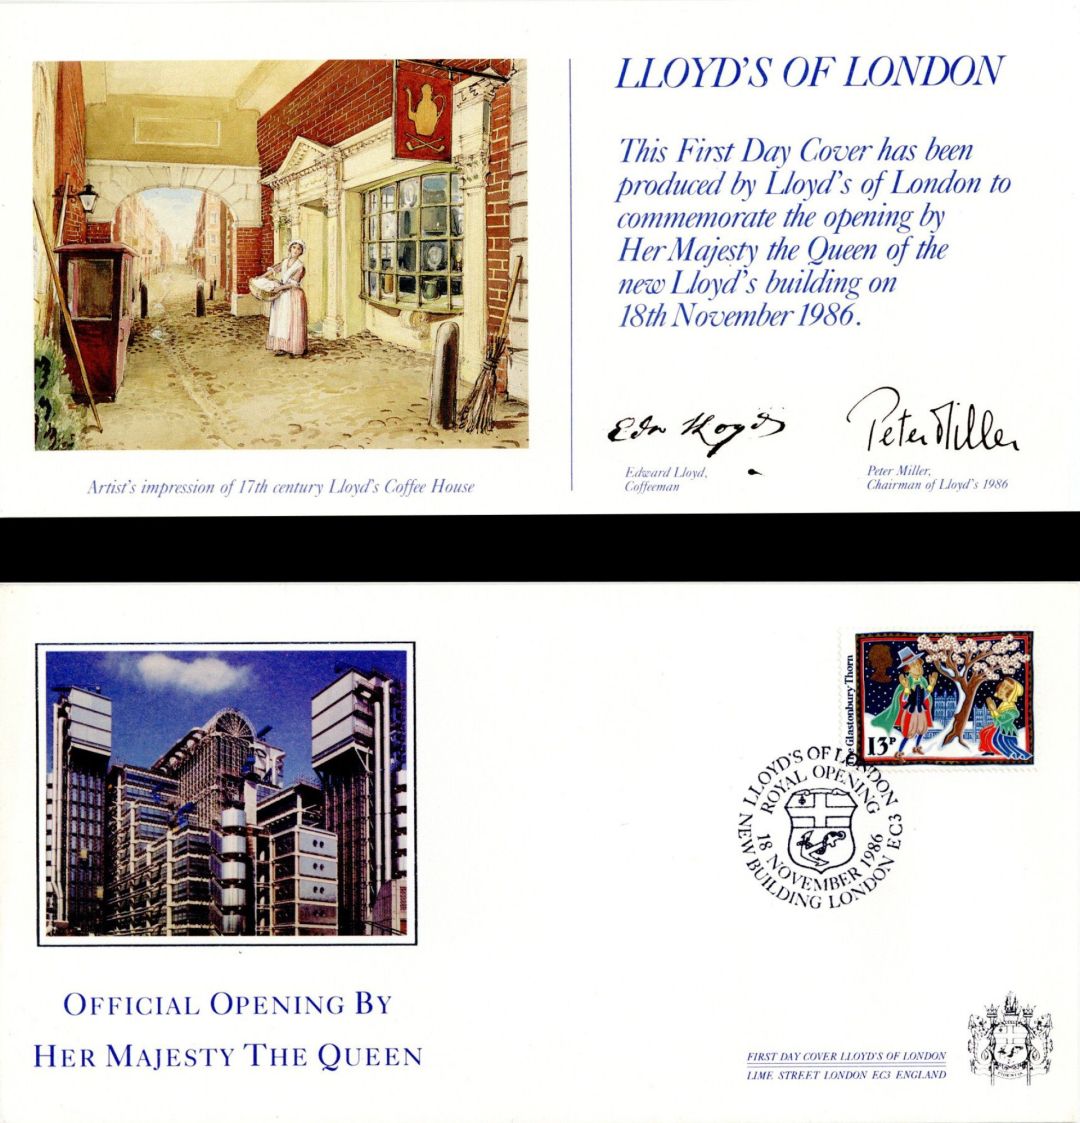 Lloyd's of London 1st Day Cover and Envelope dated 1986